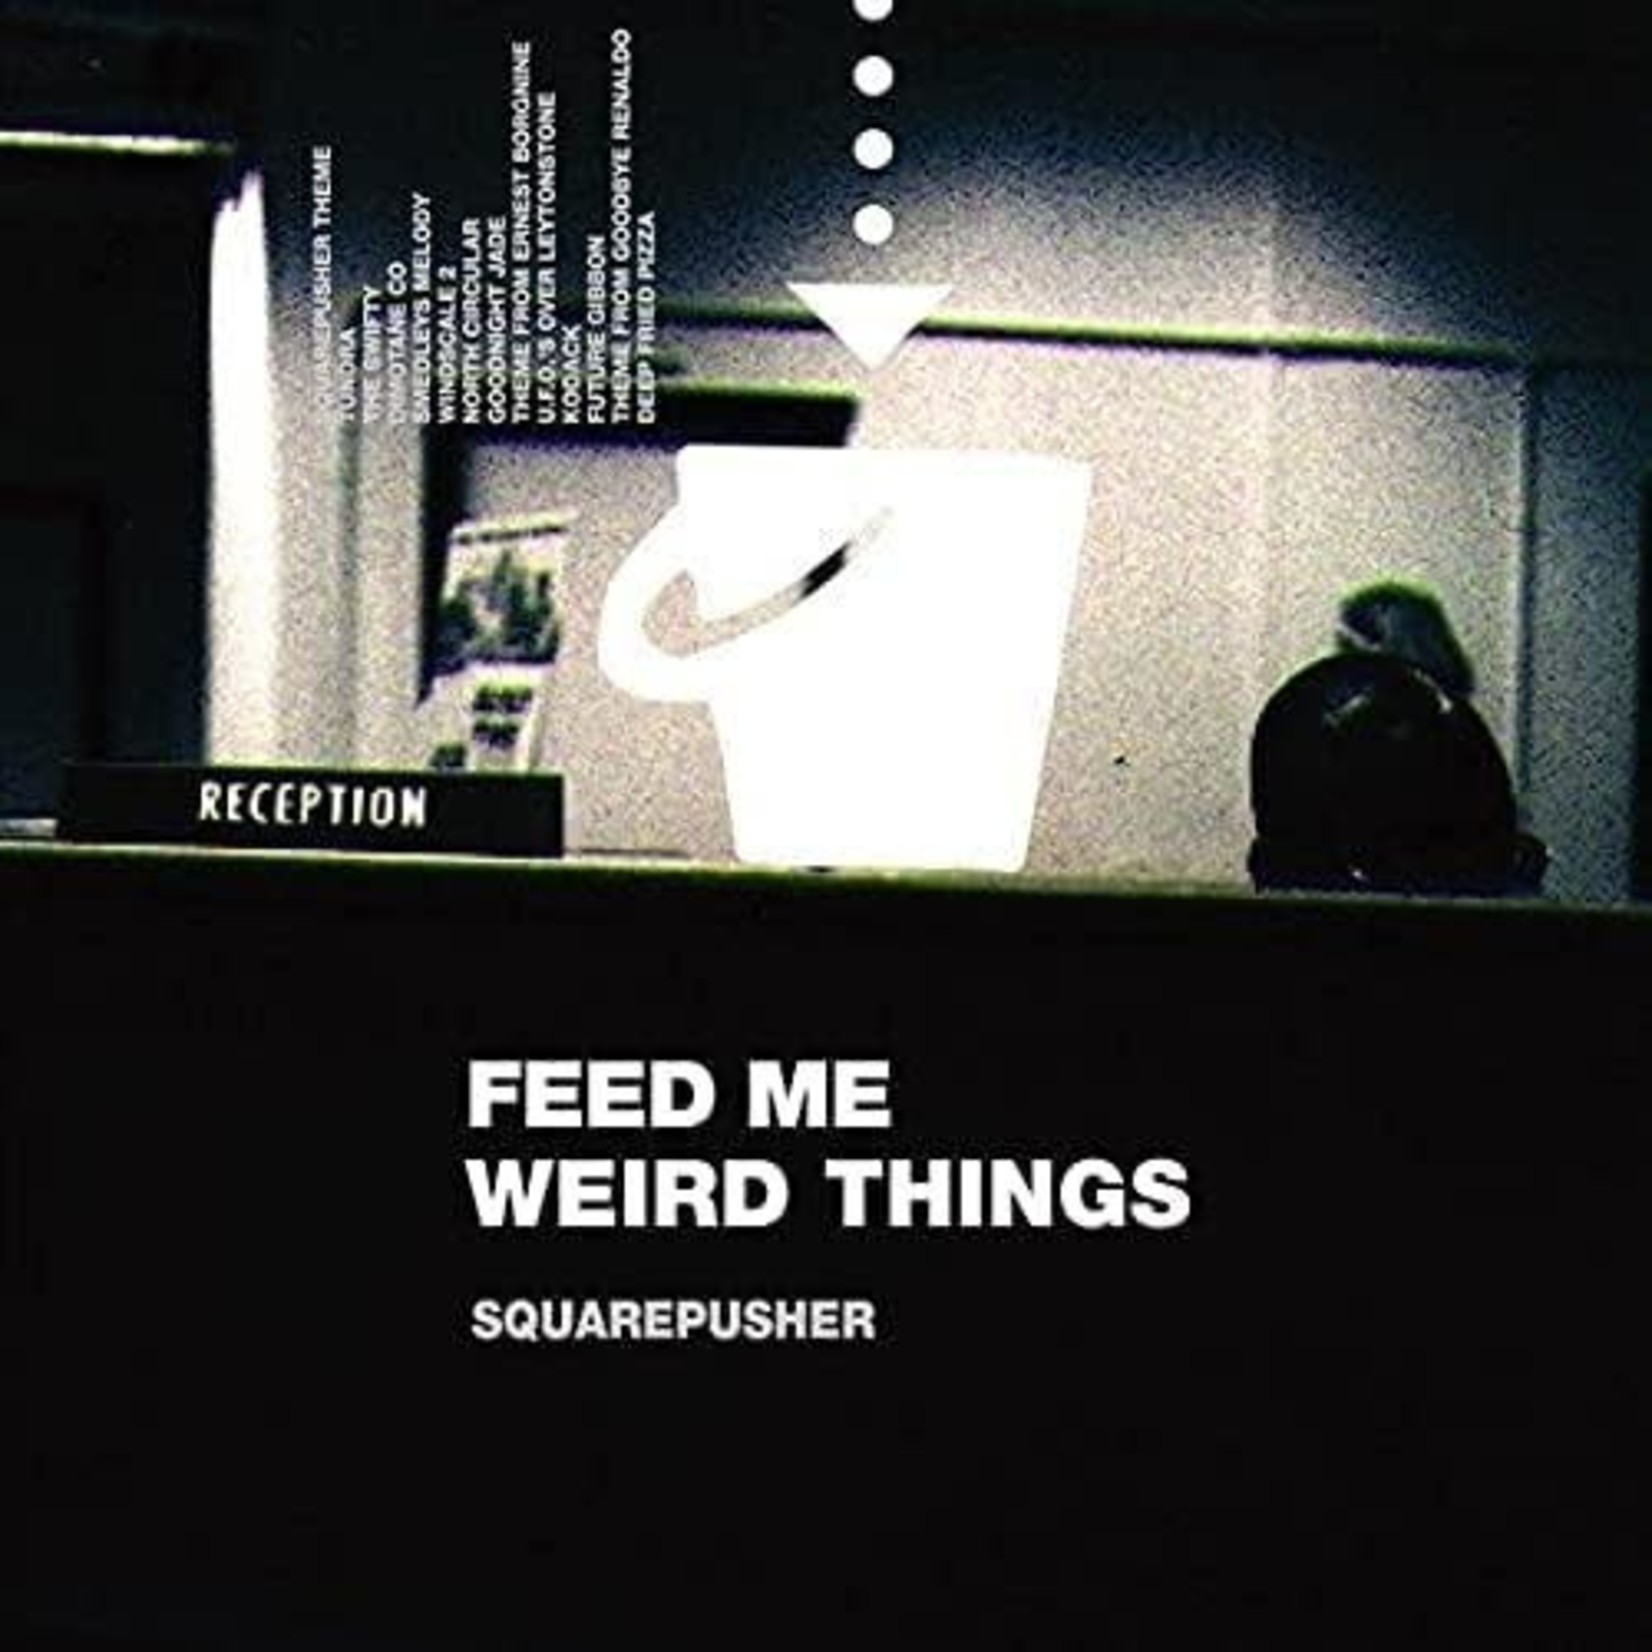 [New] Squarepusher - Feed Me Weird Things (2LP+10", clear vinyl)